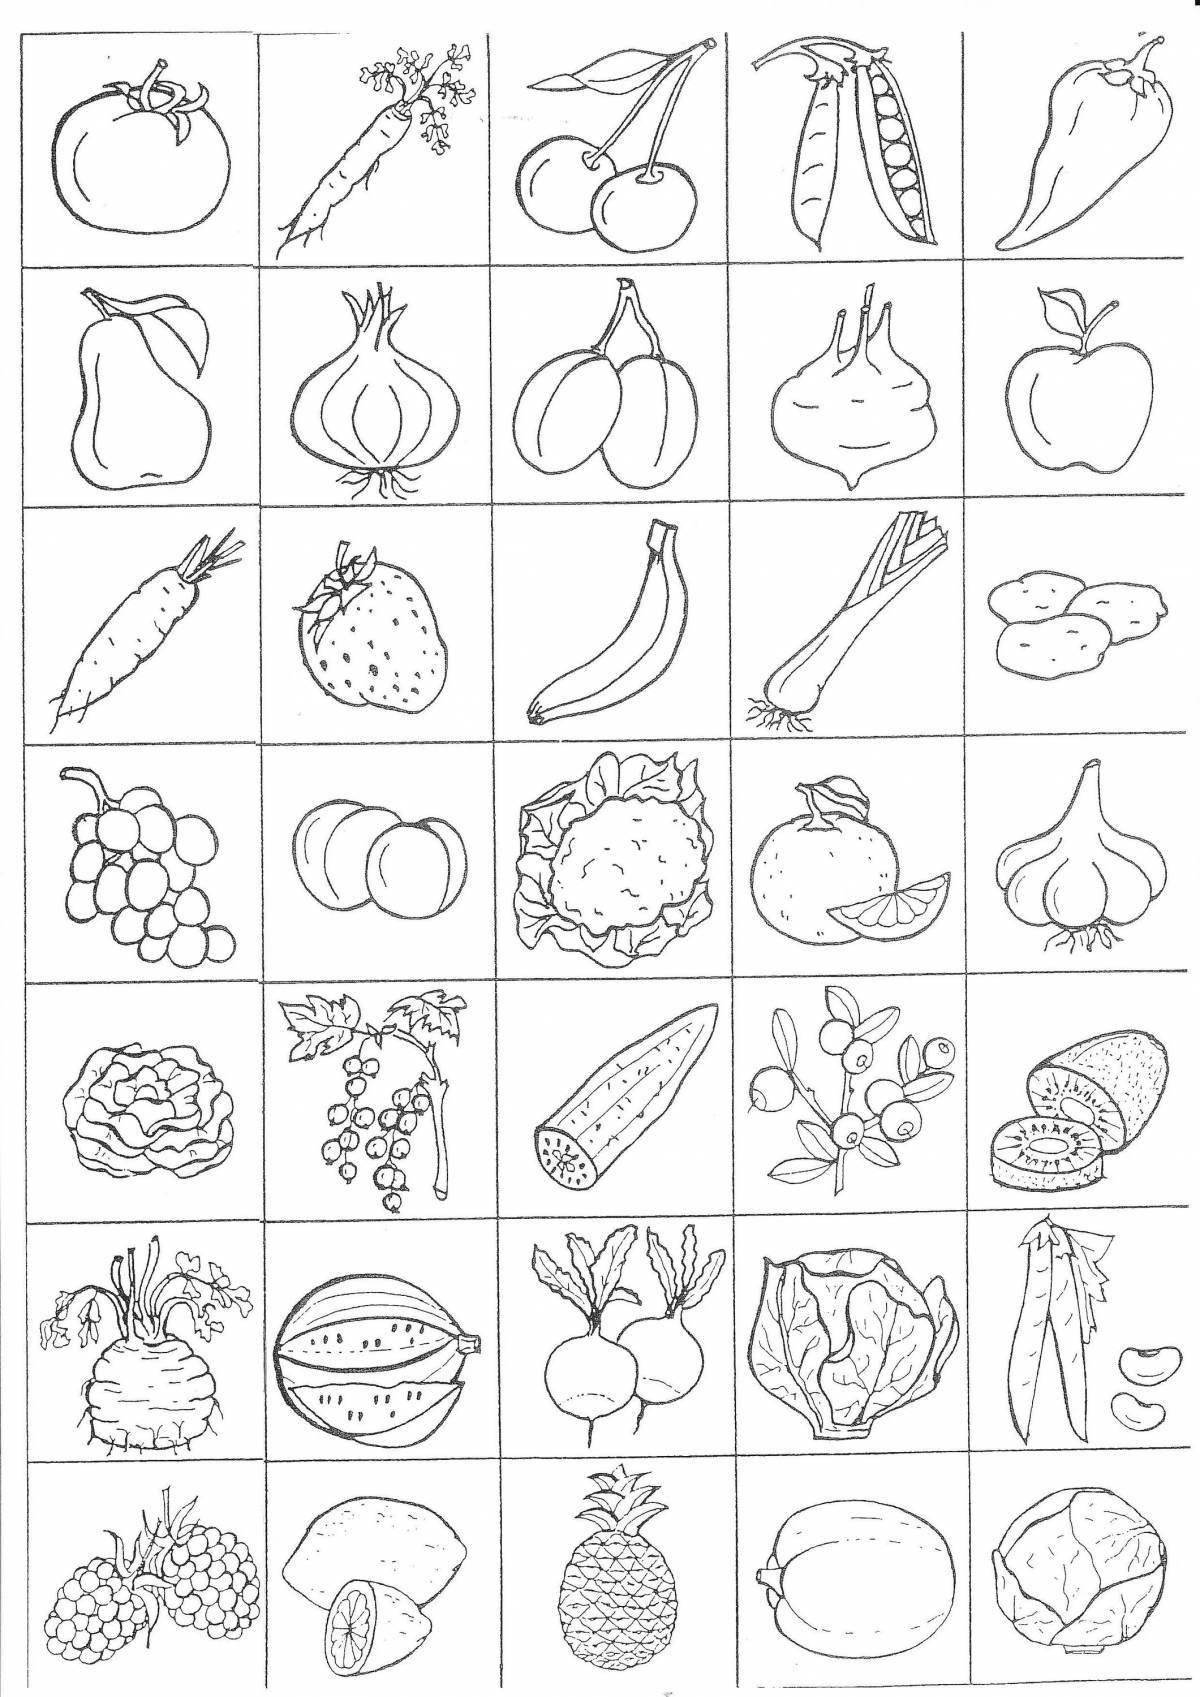 Coloring book funny fruits and vegetables